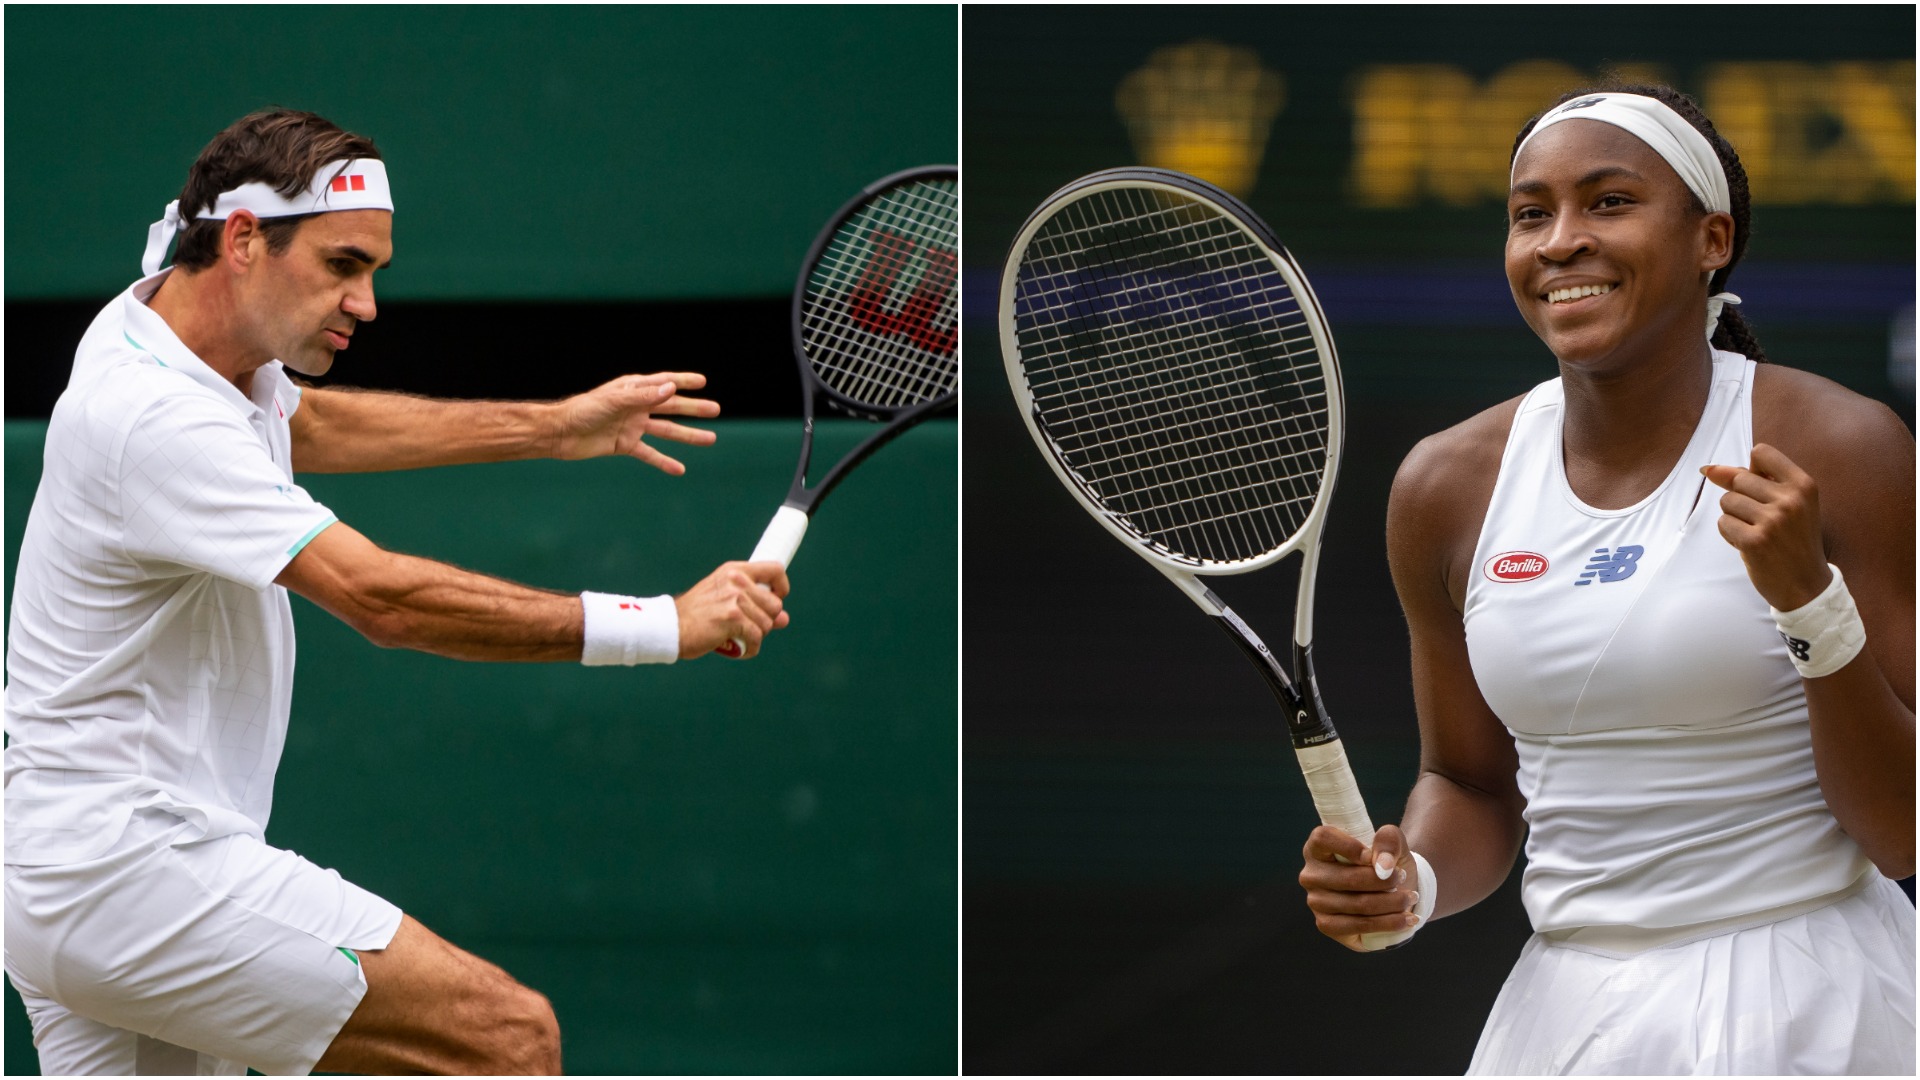 Wimbledon 2021 TV Schedule How to Watch Roger Federer, Coco Gauff Live